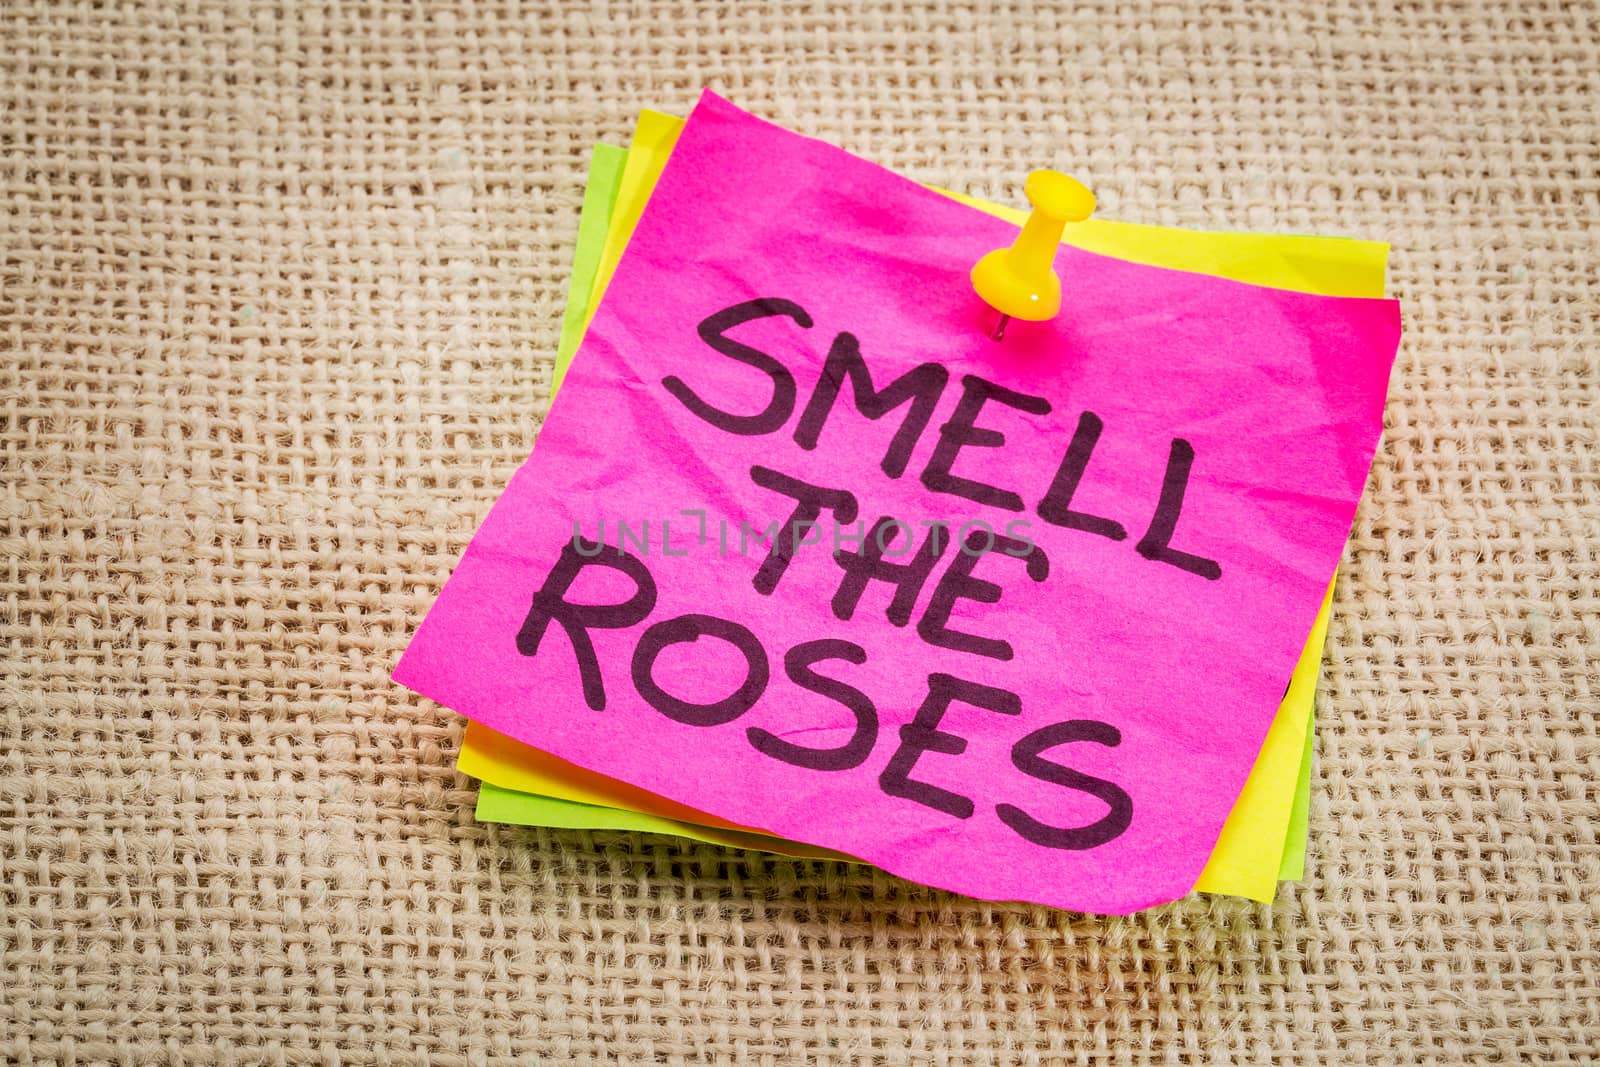 smell the roses reminder note by PixelsAway